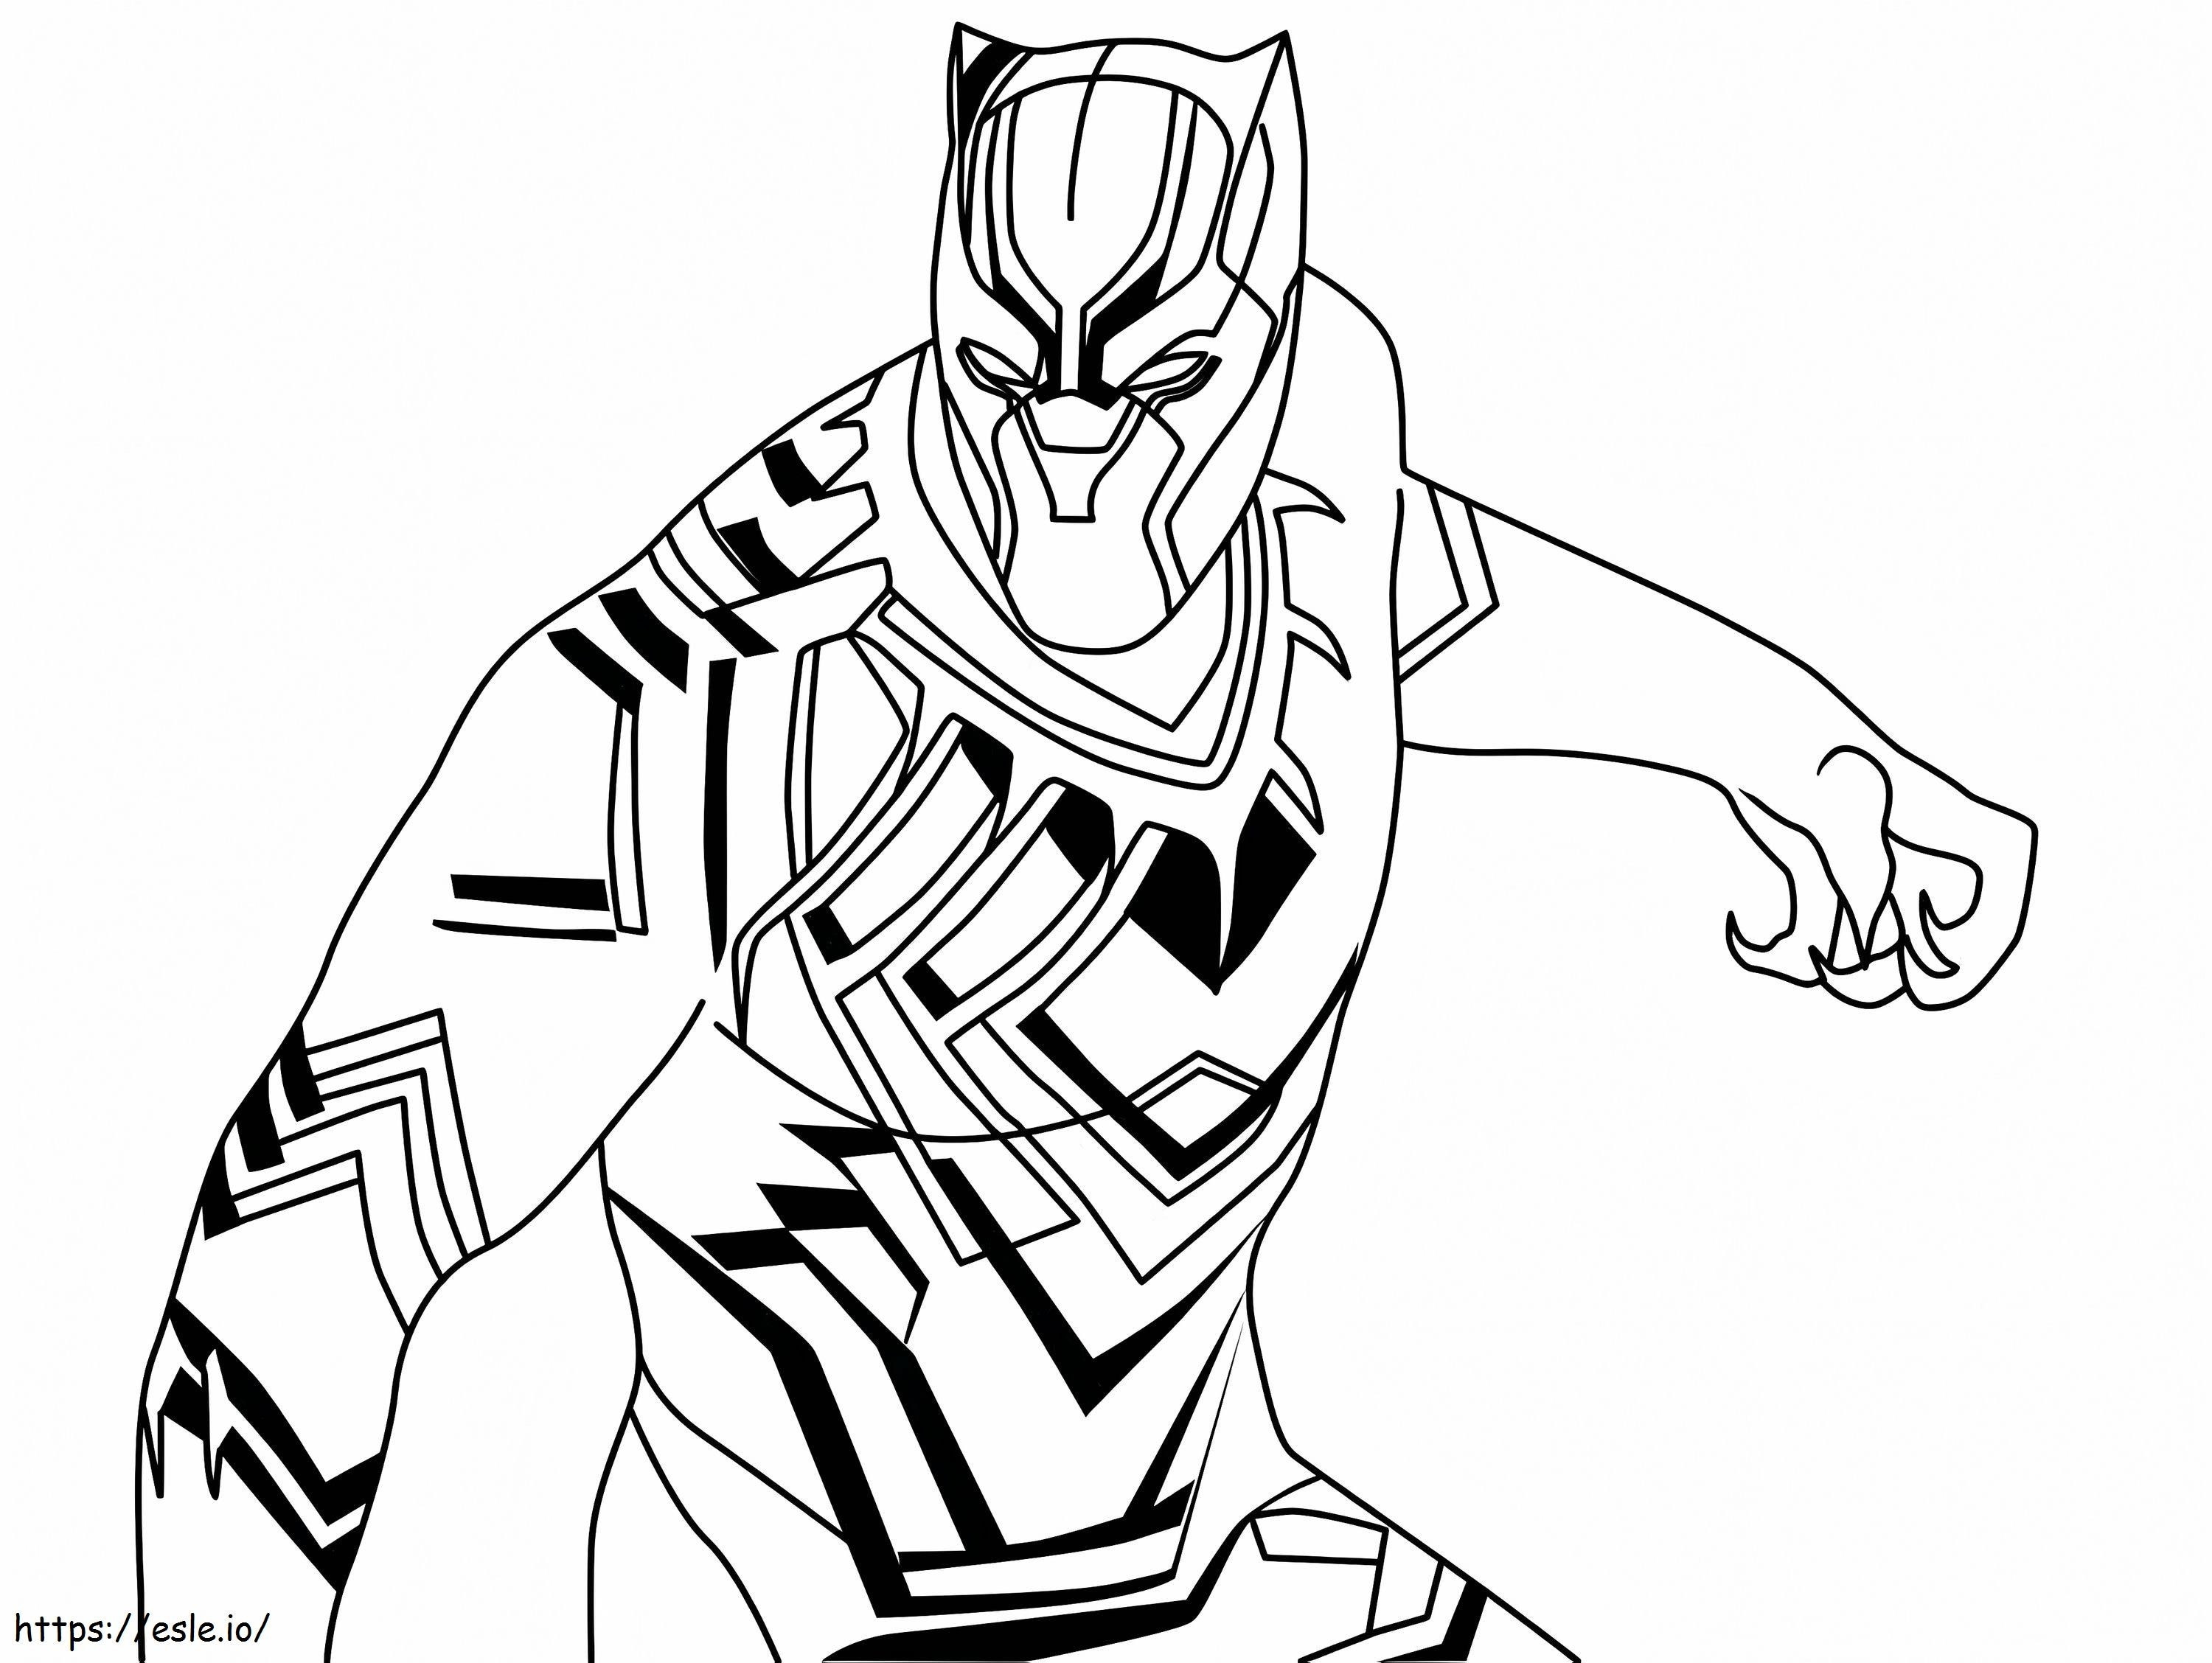 Black Panther Black Panther Printable 1 Printable Black Panther Colouring Sheets 1 coloring page